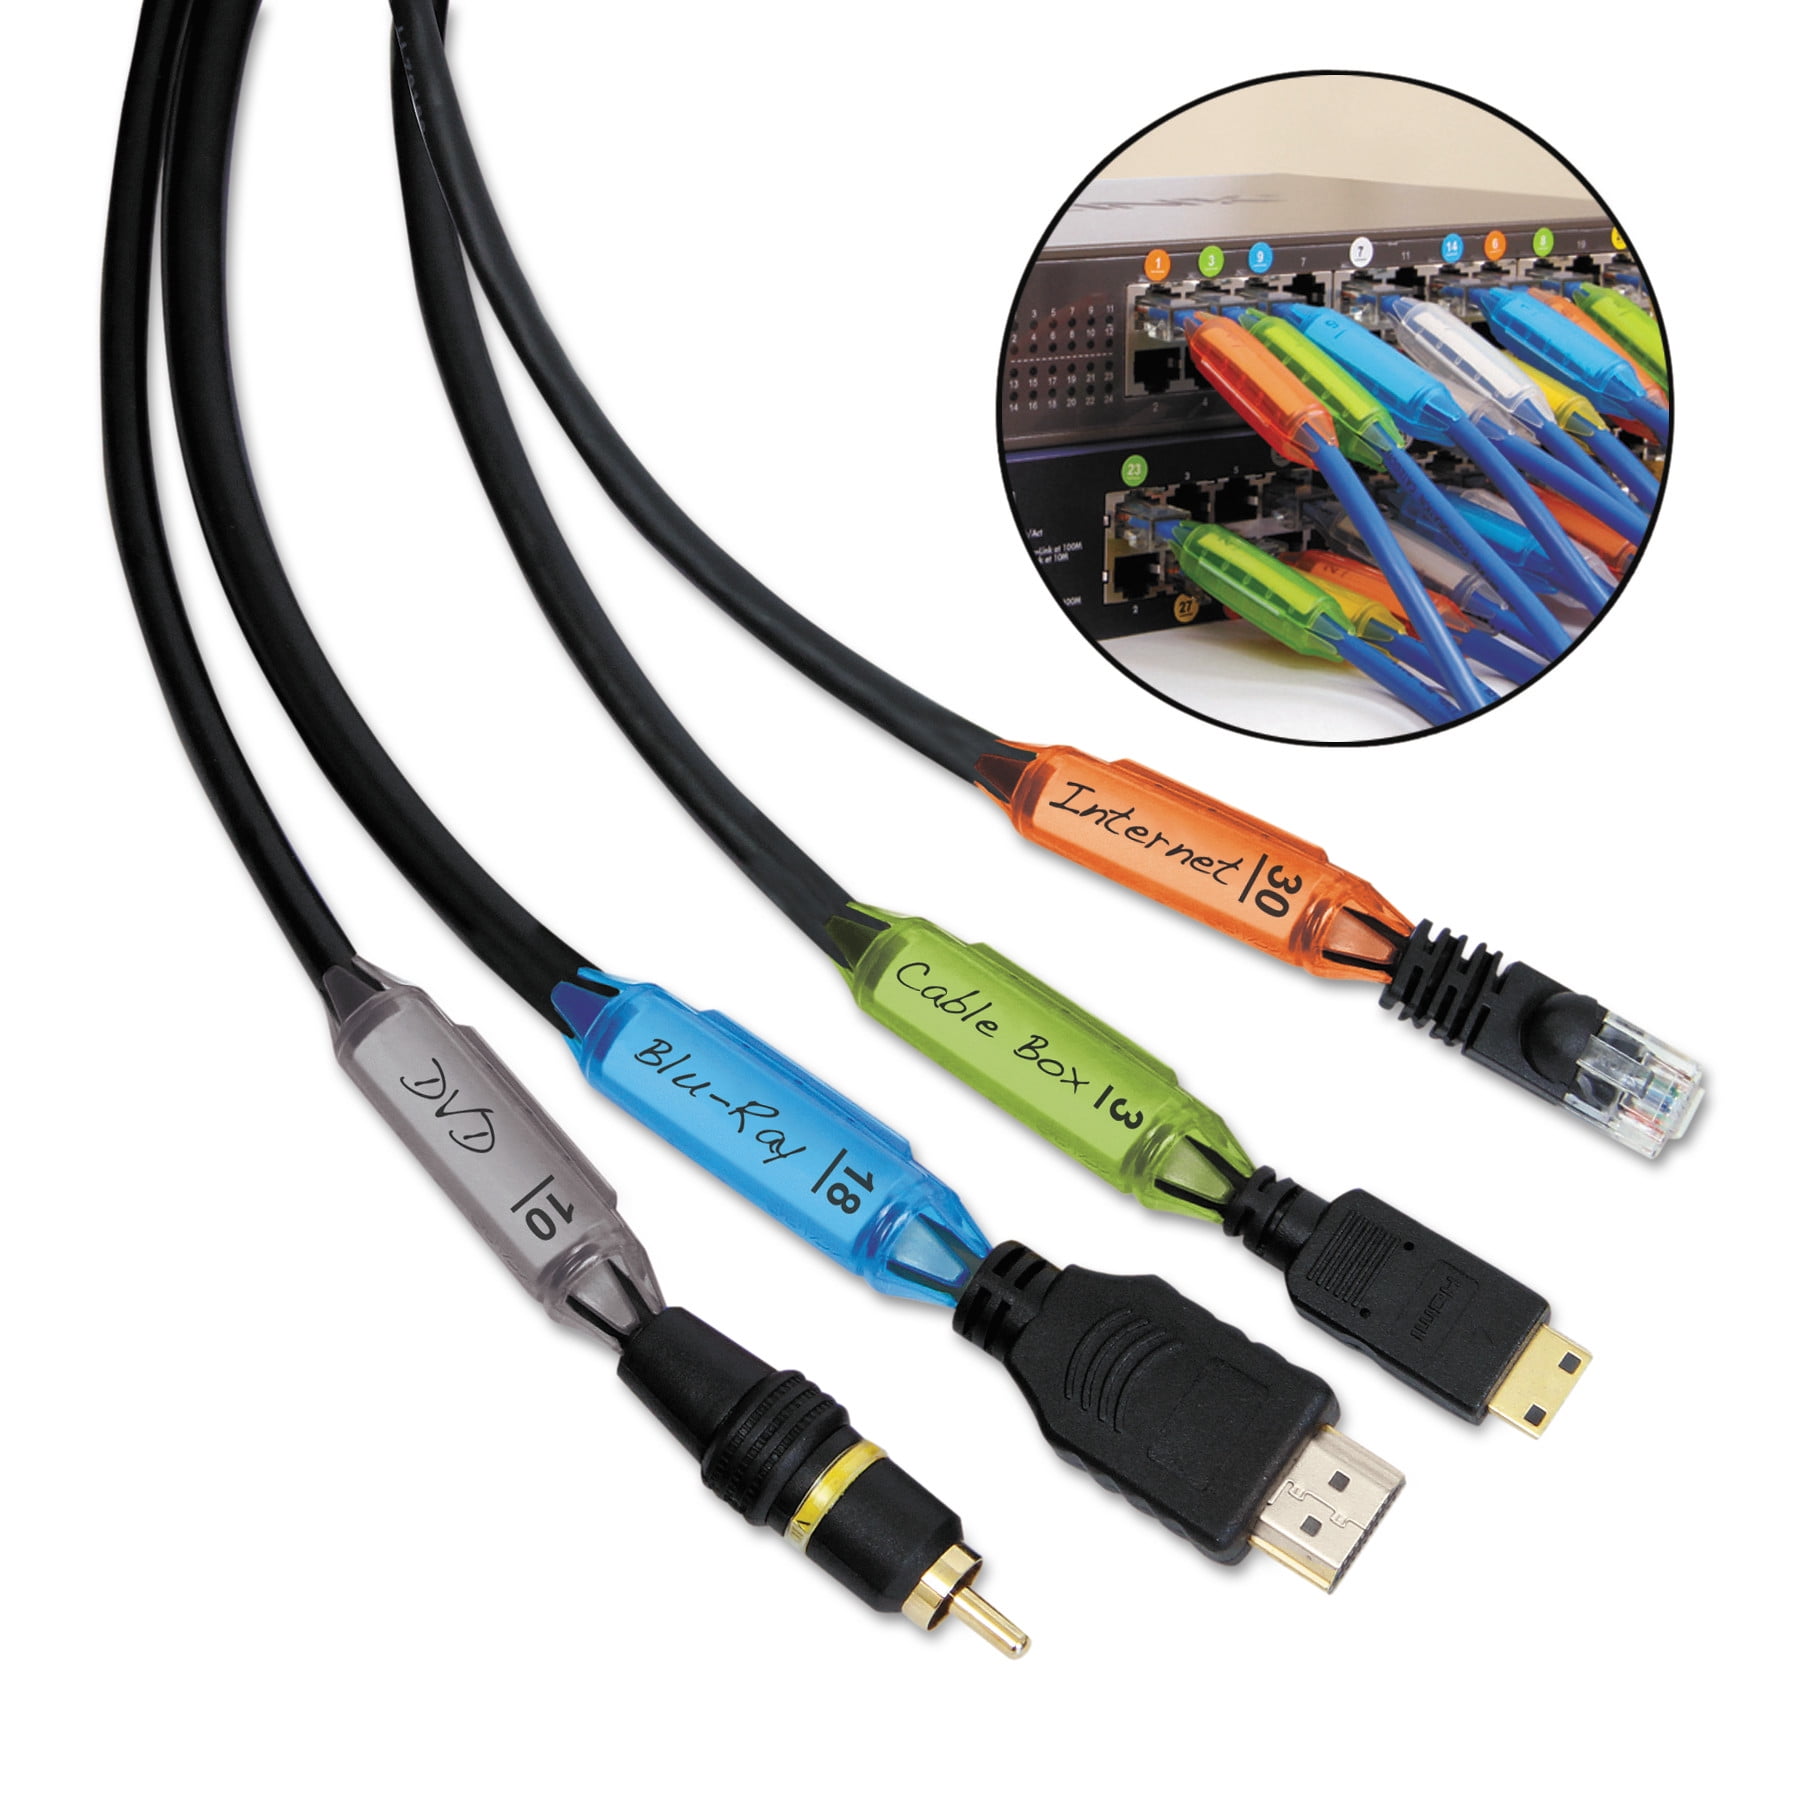 12 per Pack Assorted Colors ID Pro Cord and Cable Identification System 